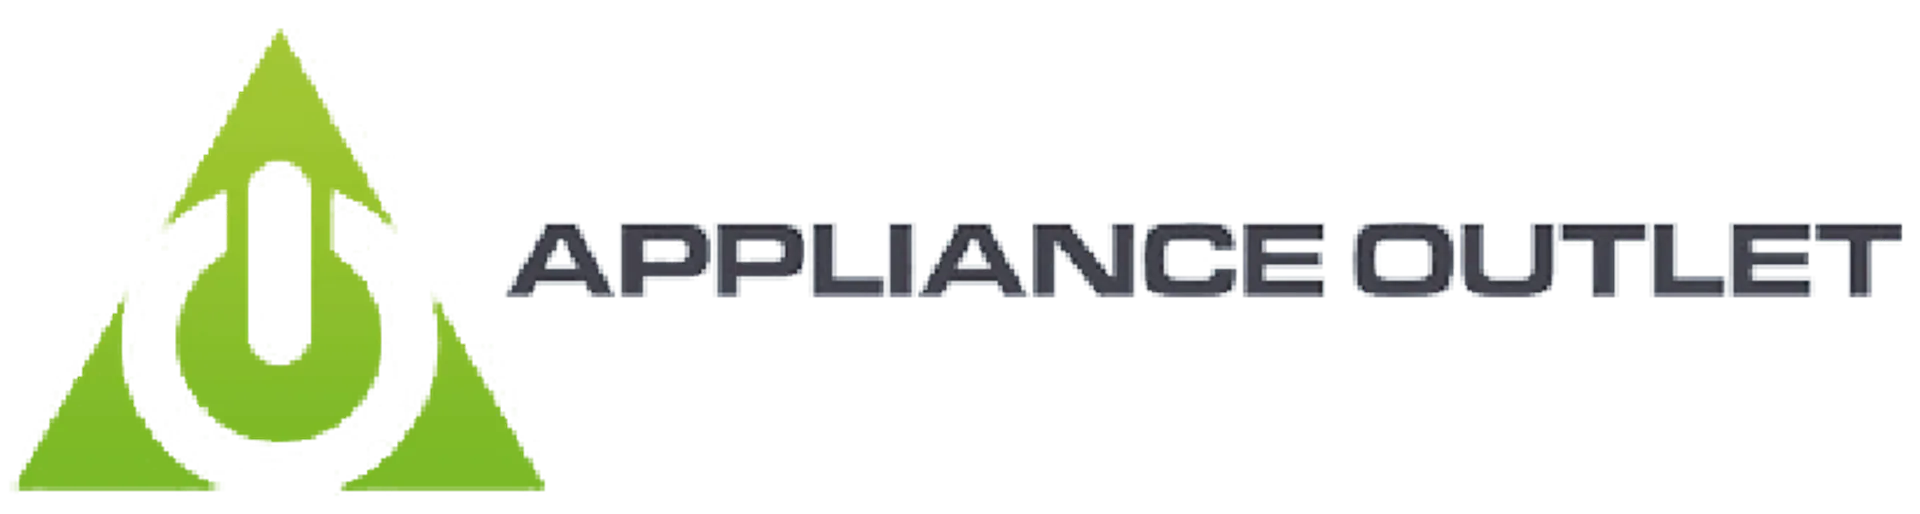  APPLIANCE OUTLET logo current weekly ad